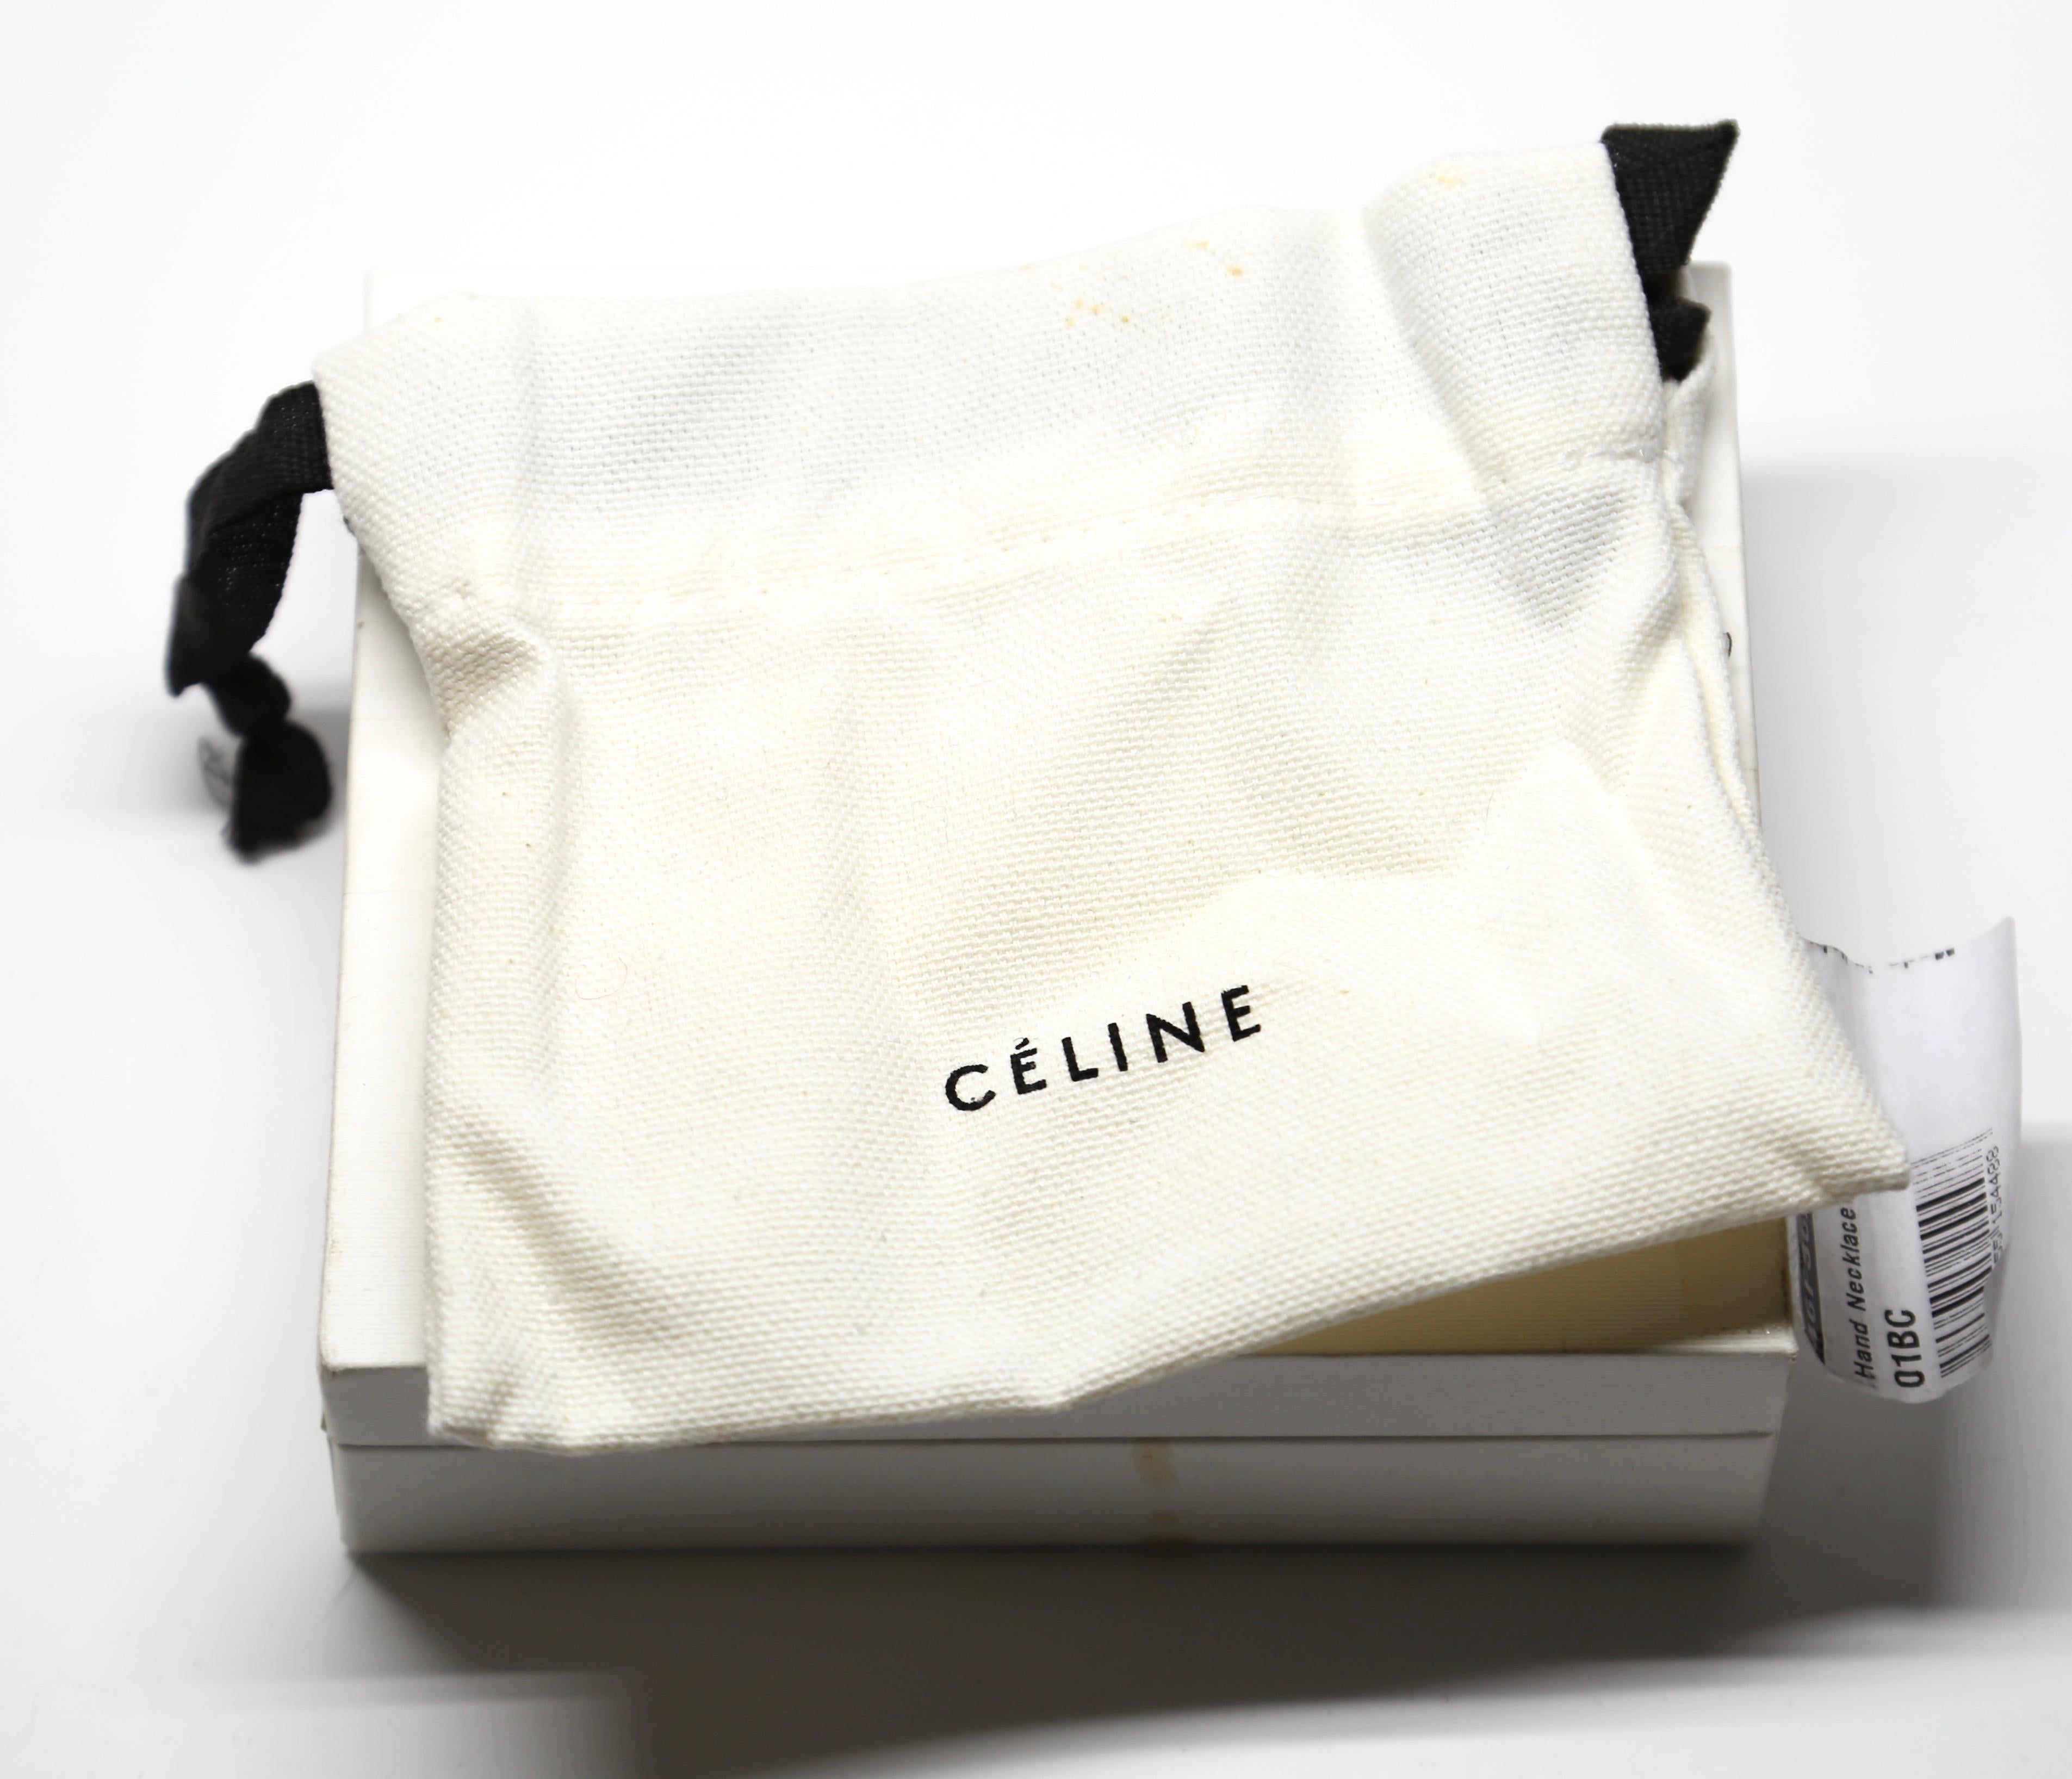 2014 CELINE by PHOEBE PHILO porcelain hand necklace by LIMOGES 2